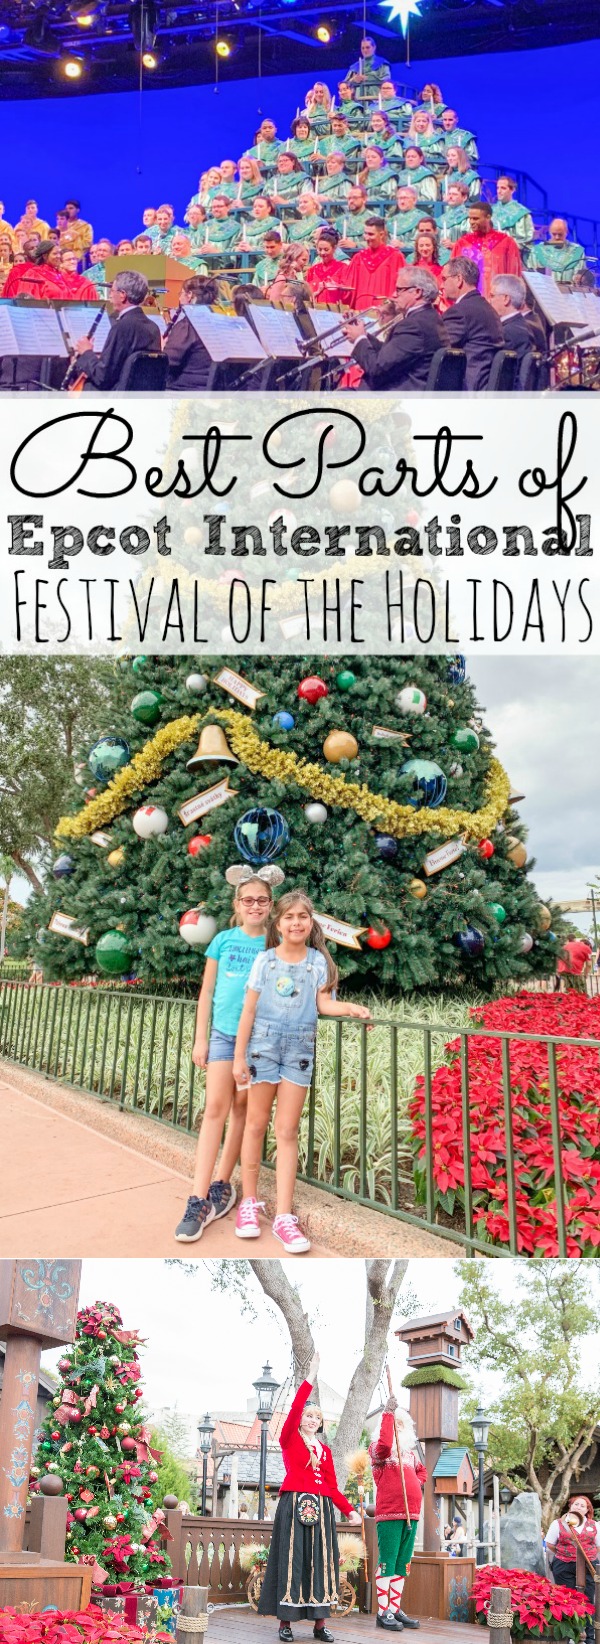 Best Parts of Epcot Festival of the Holidays Events